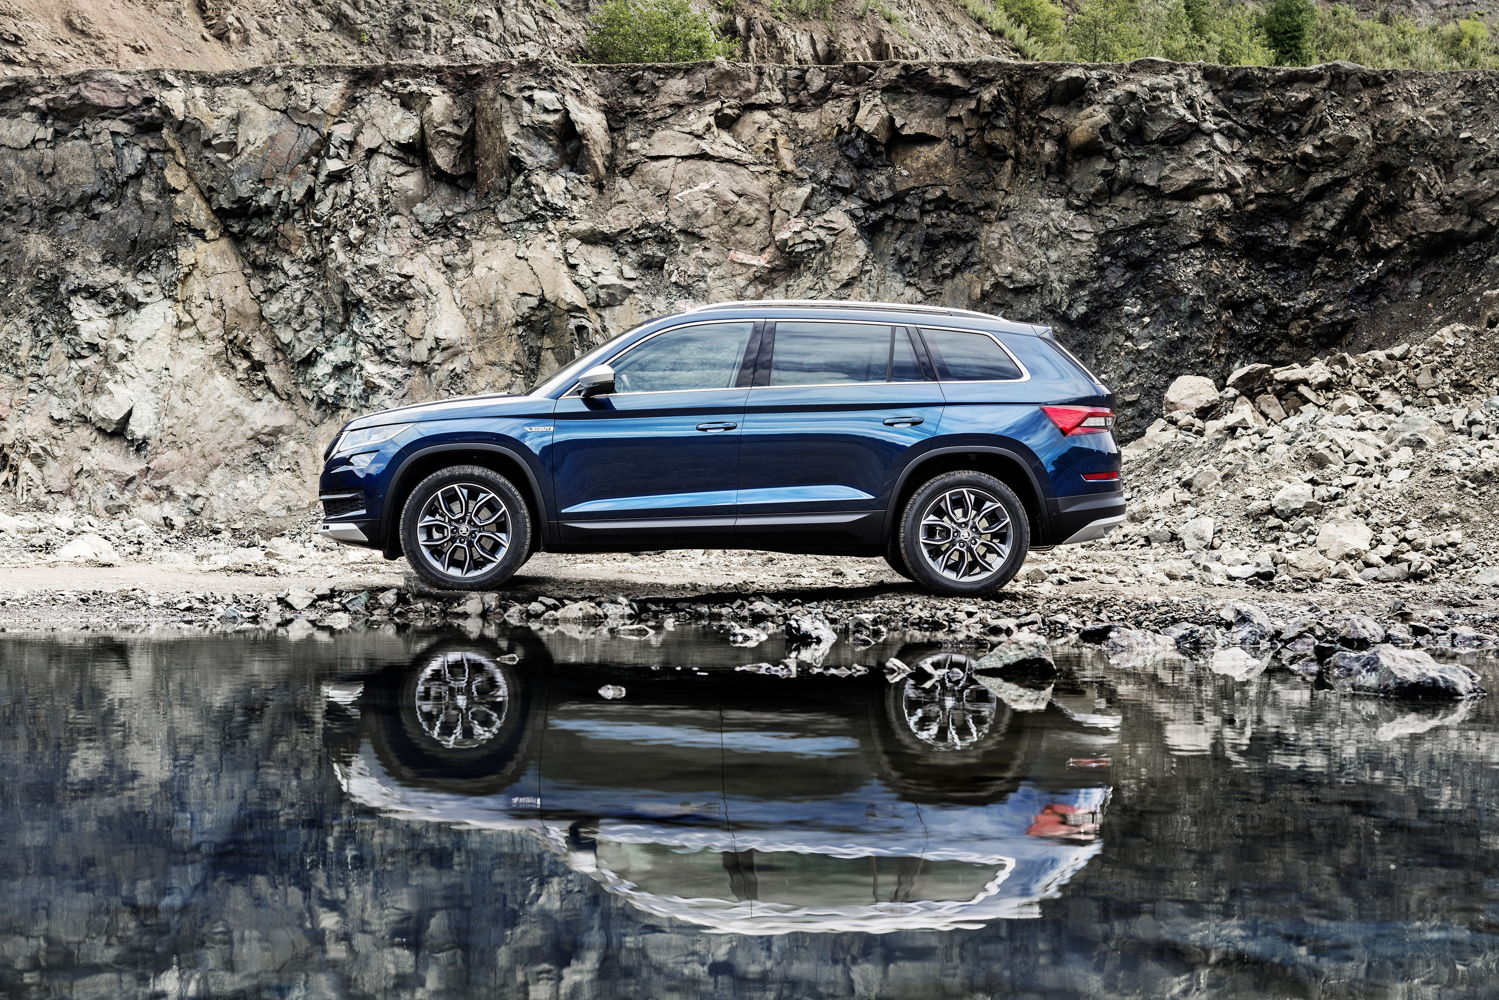 The ŠKODA KODIAQ SCOUT comes with all-wheel drive and rough-road package, which protects the engine and underbody from damage, as standard.